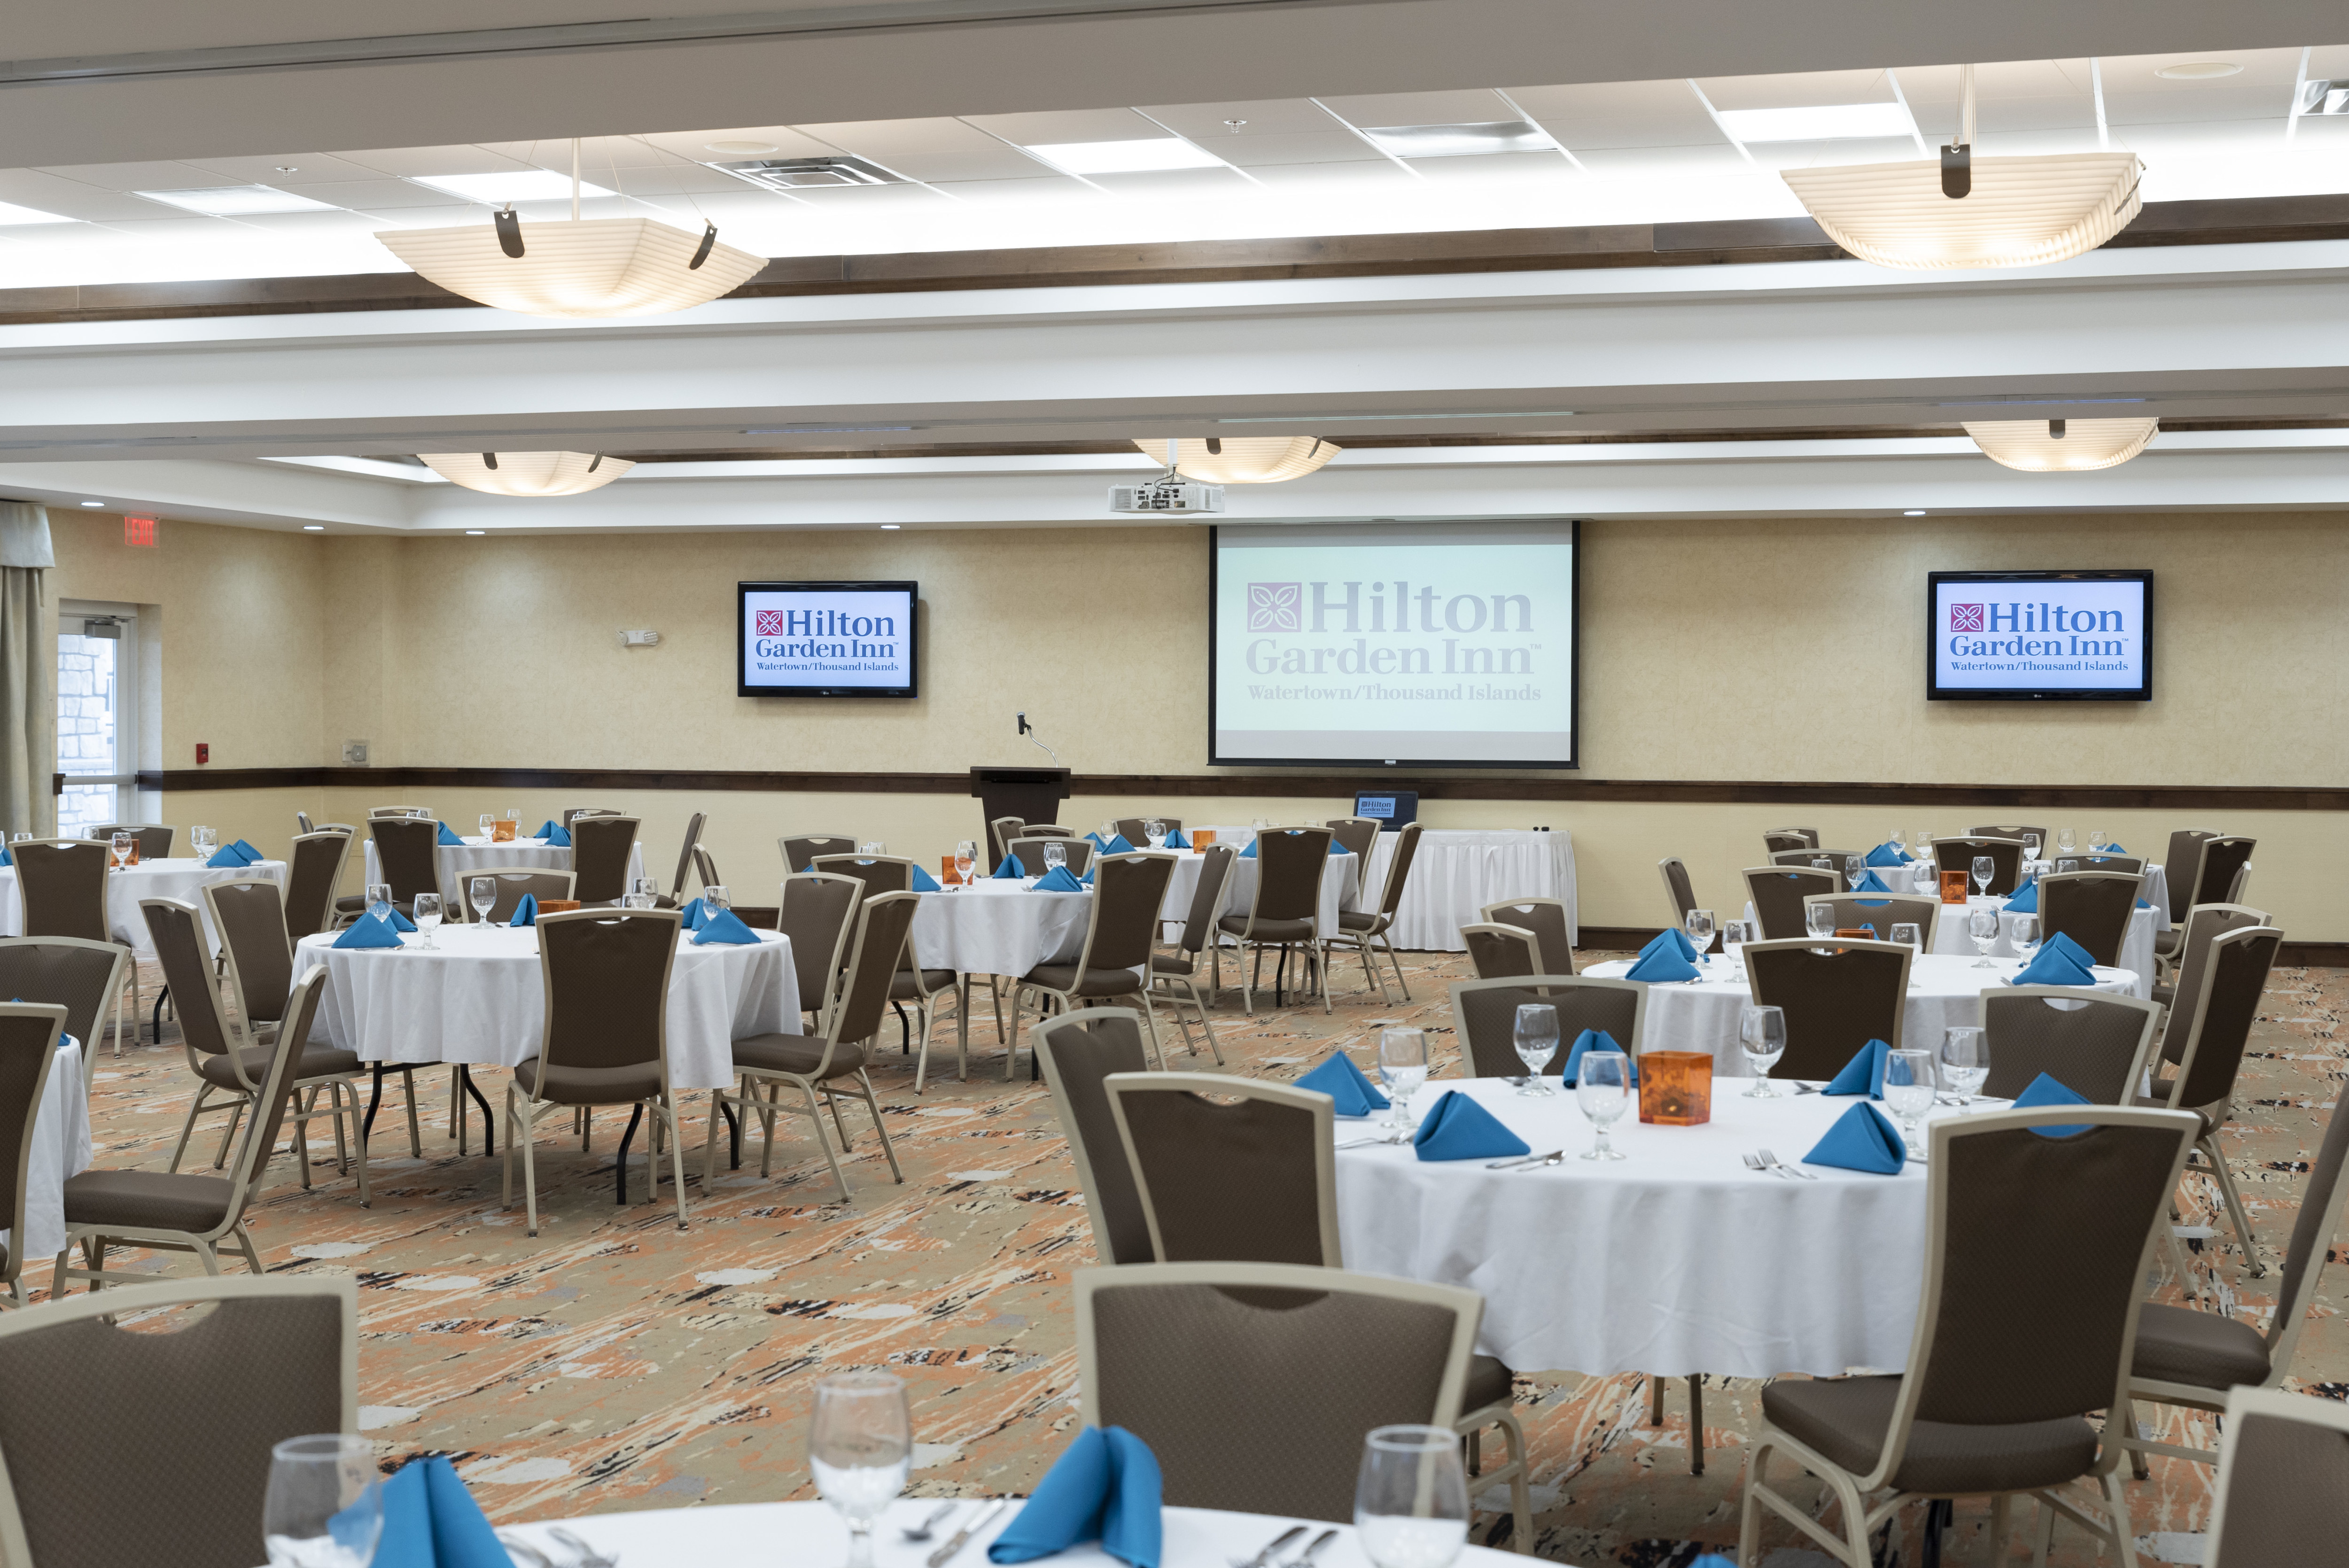 Round Tables in City Center Ballroom with HDTVs and a Projection Screen